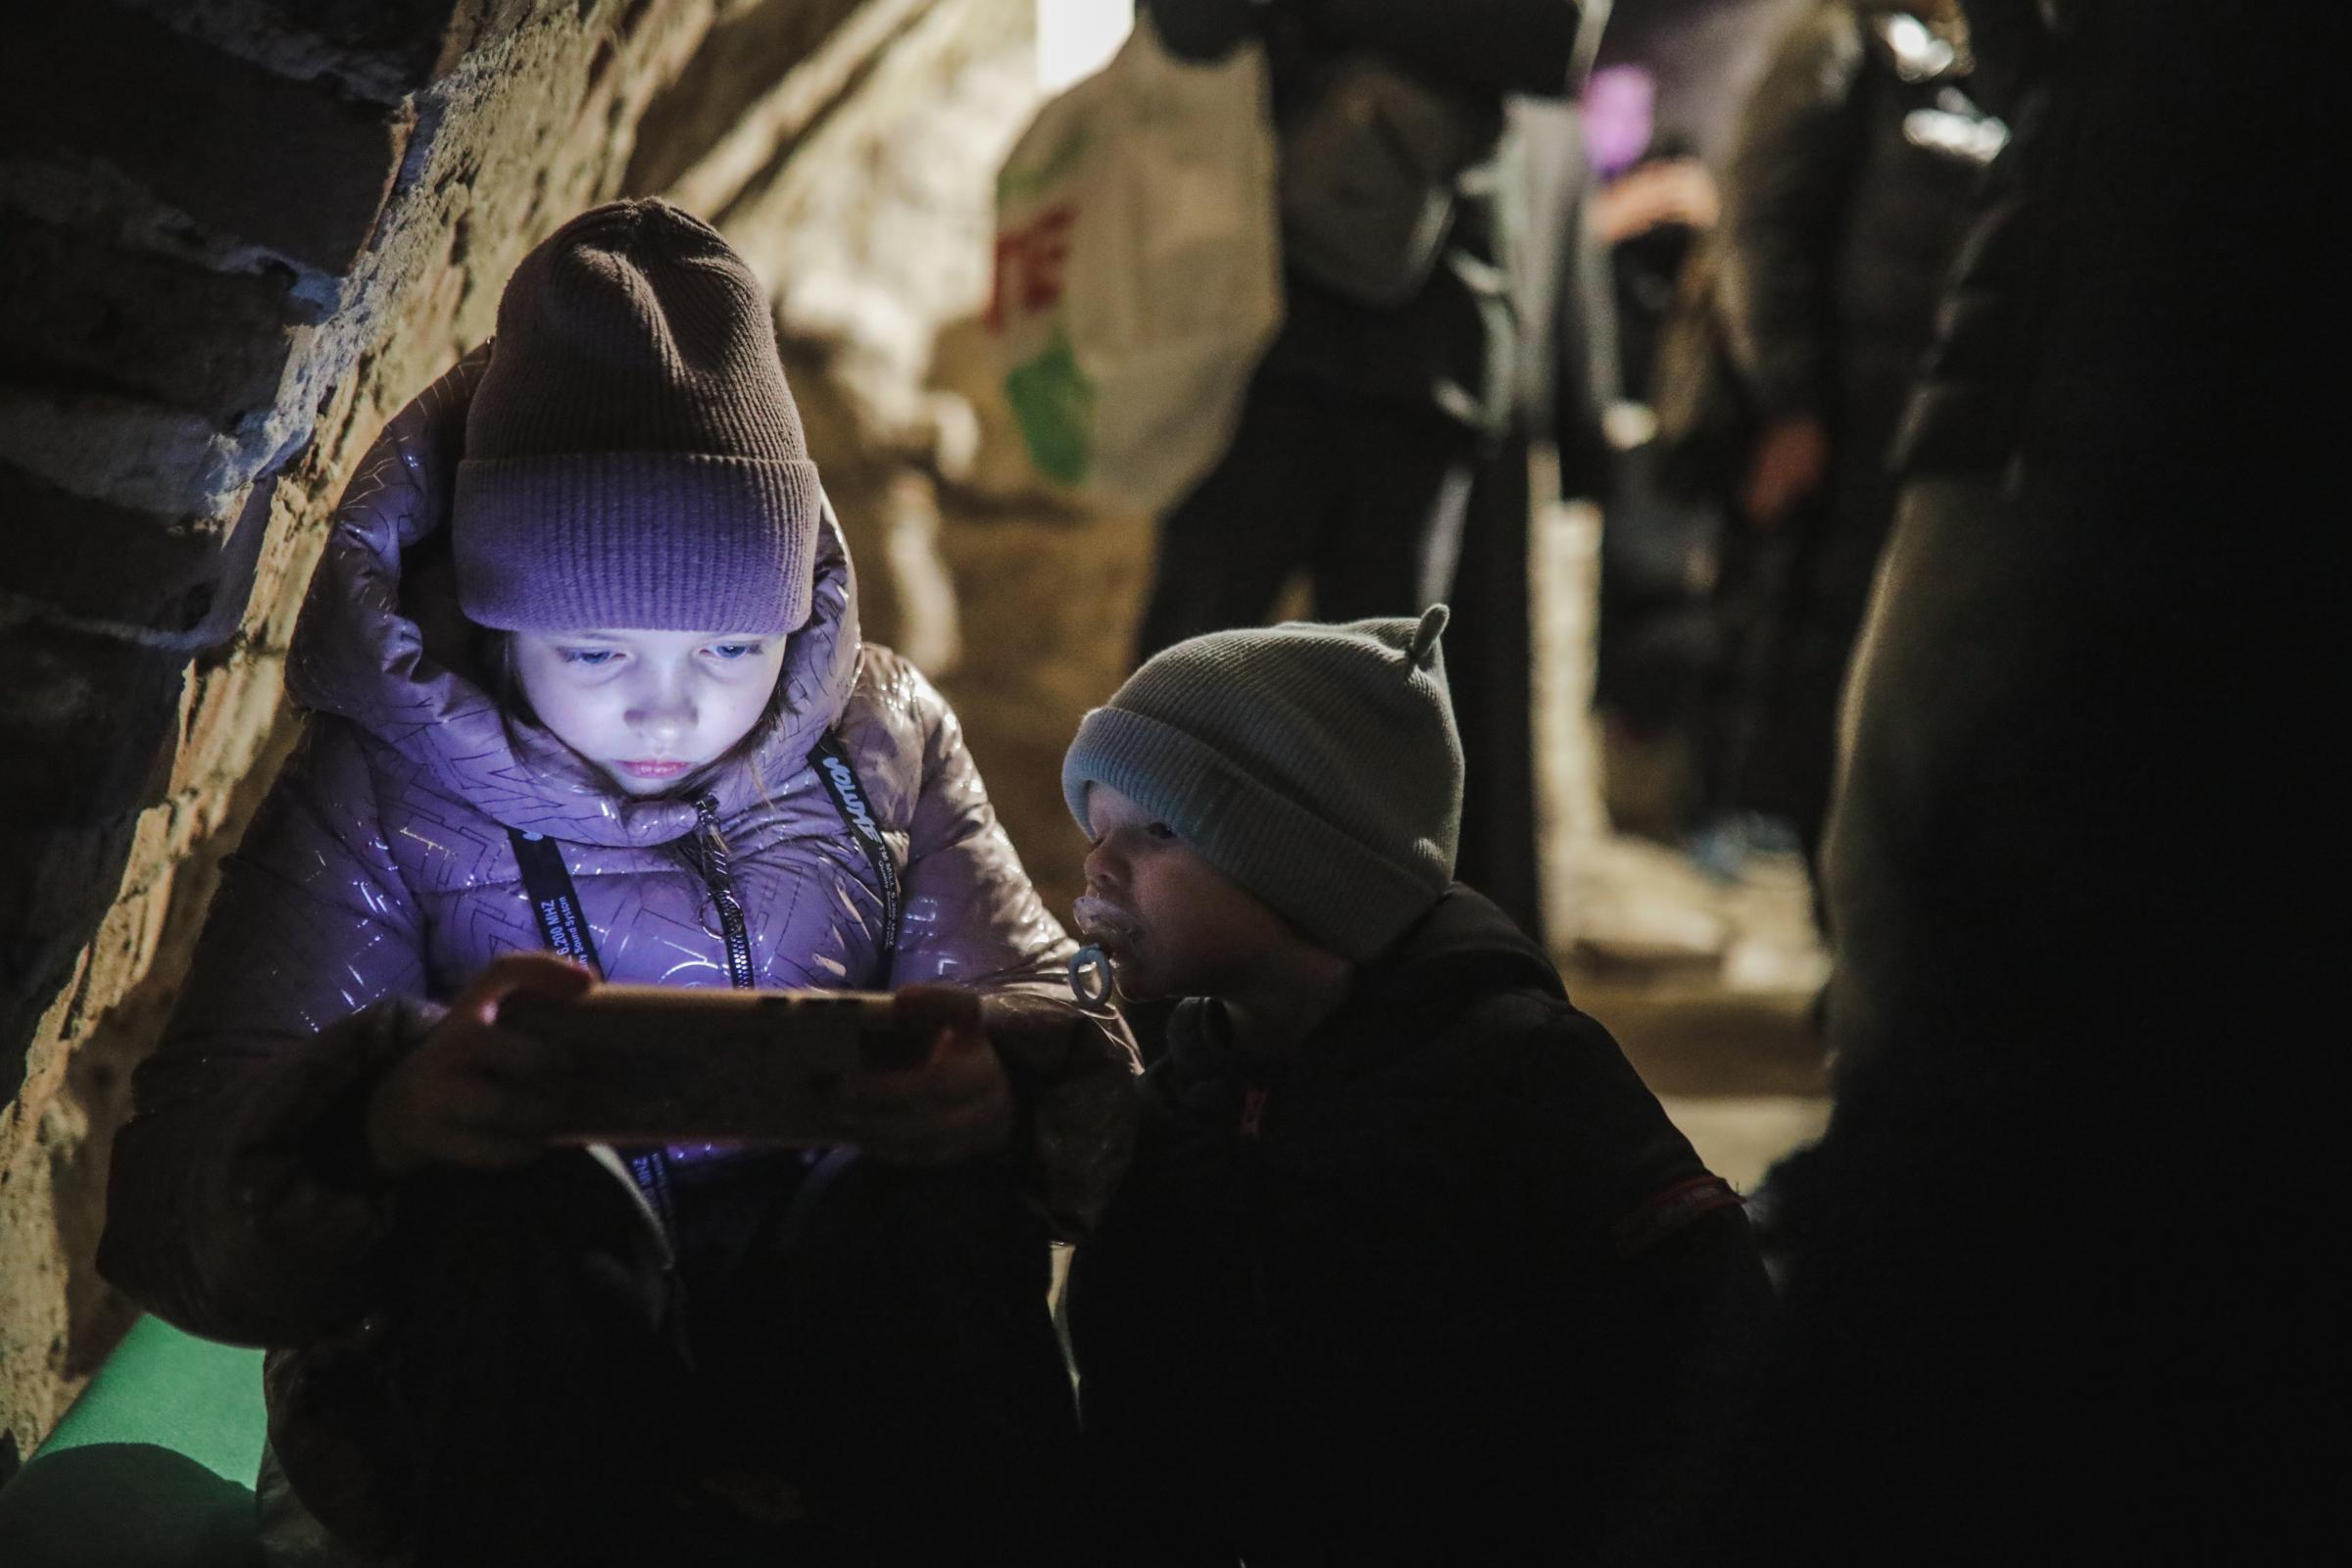 Anadolu/Getty Musicians play music in Lviv to comfort people displaced from war zones